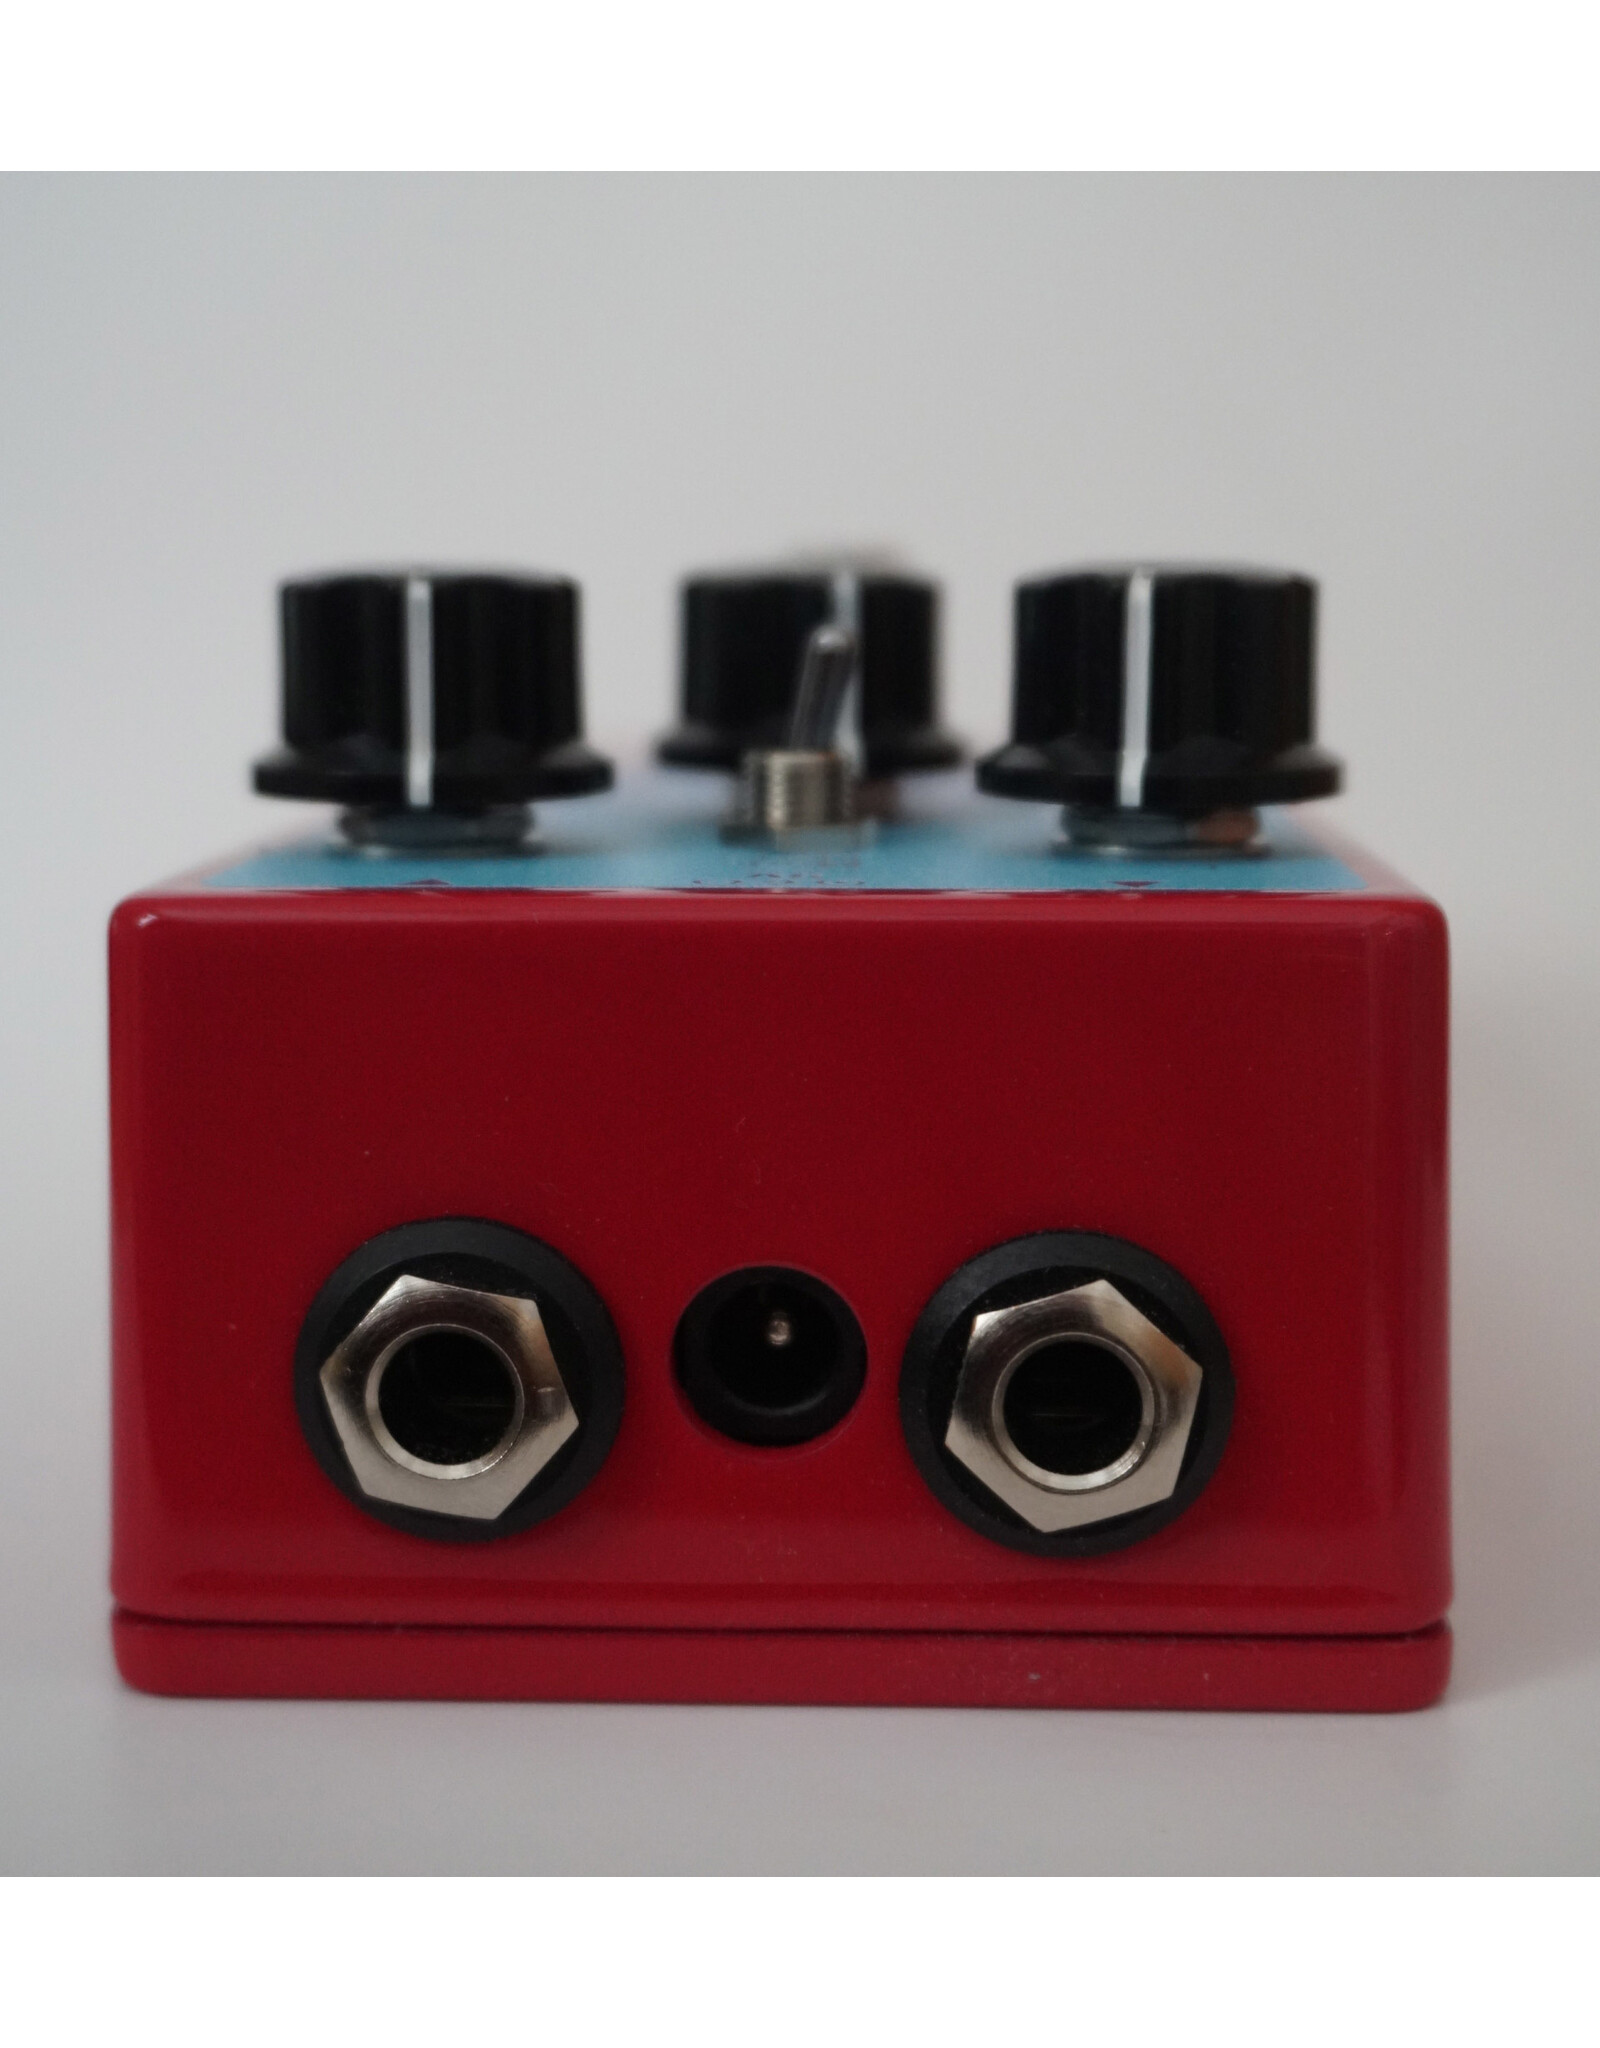 EarthQuaker Devices Earthquaker Devices  Plumes Small Signal Shredder, Twin House Music Custom Raspberry Red/Light Blue